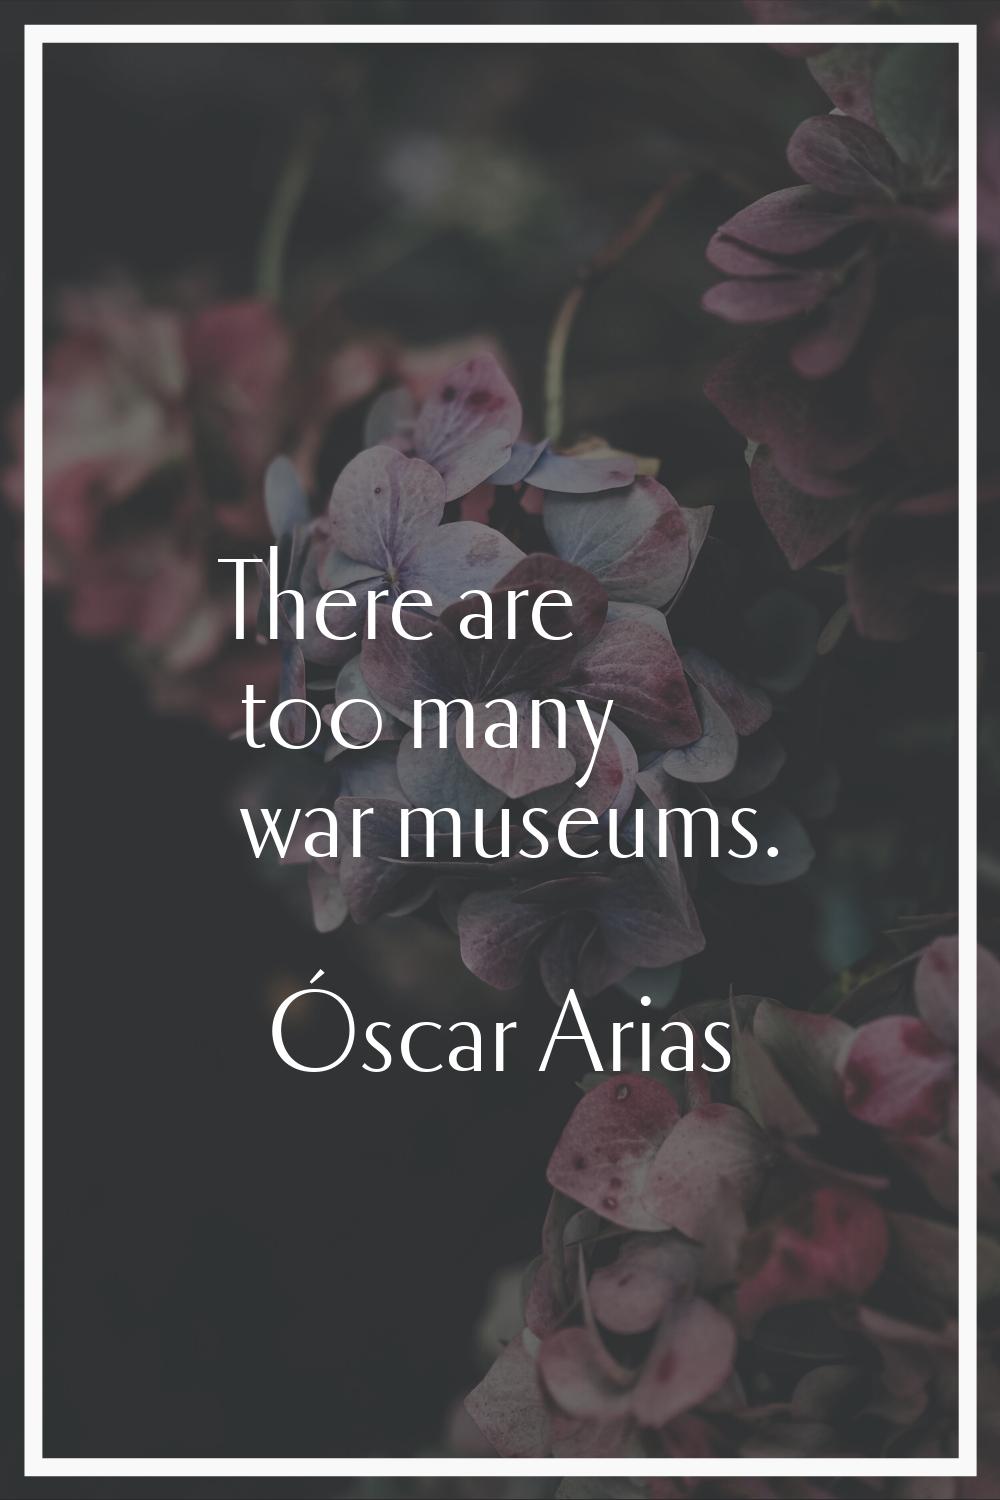 There are too many war museums.